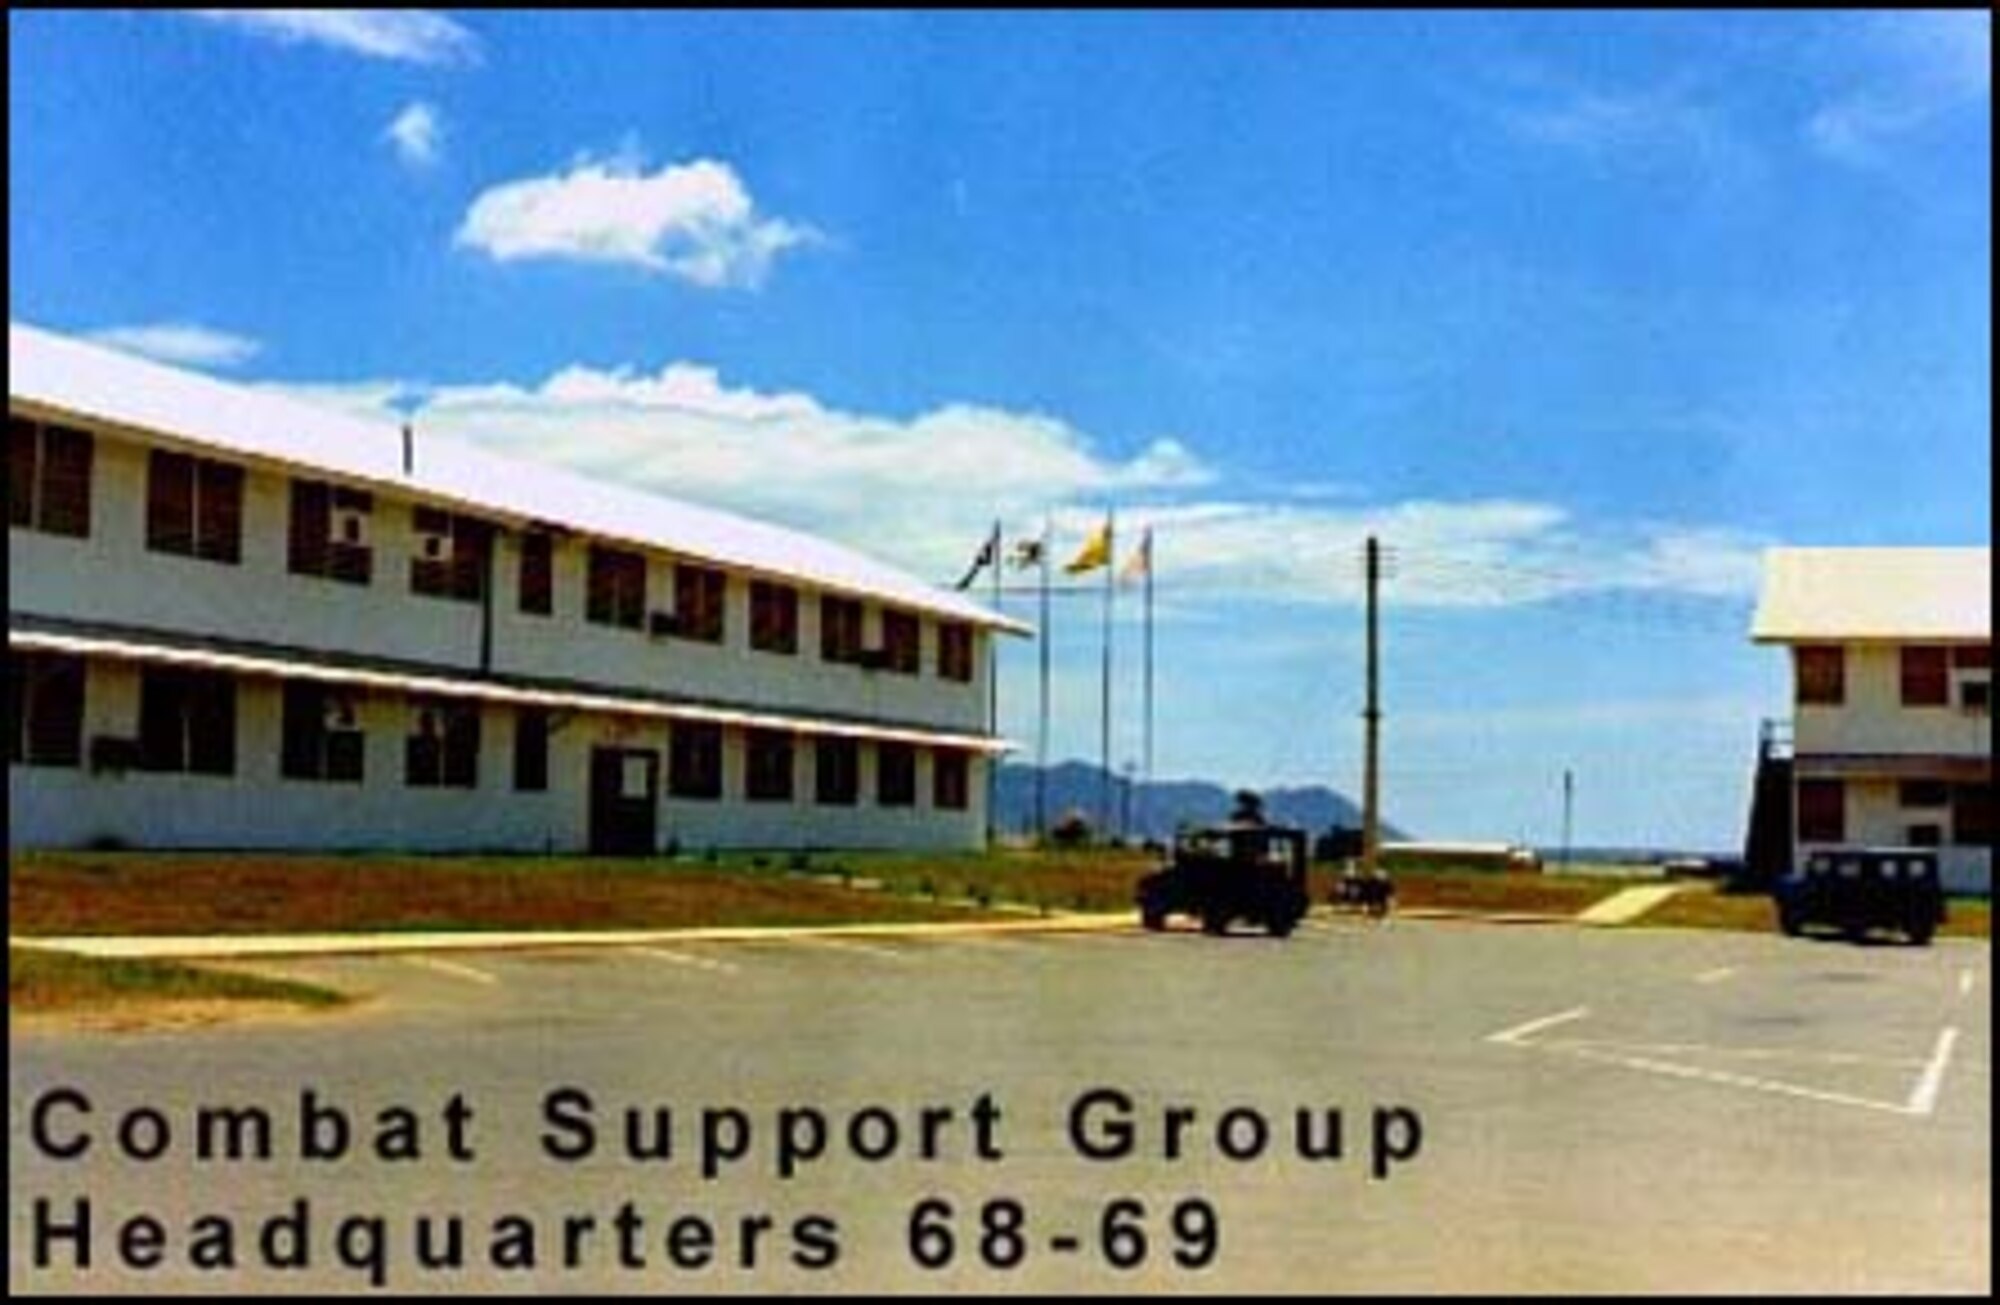 This is a photograph of the 315th Combat Support Group Headquarters Building at Phan Rang Air Base (PRAB), Republic of Vietnam.  PRAB was home to 3-1-5 from 1 August 1967 to 31 March 1972.  (Photograph courtesy of Mike Vogel, 315 SOW/CAMS)